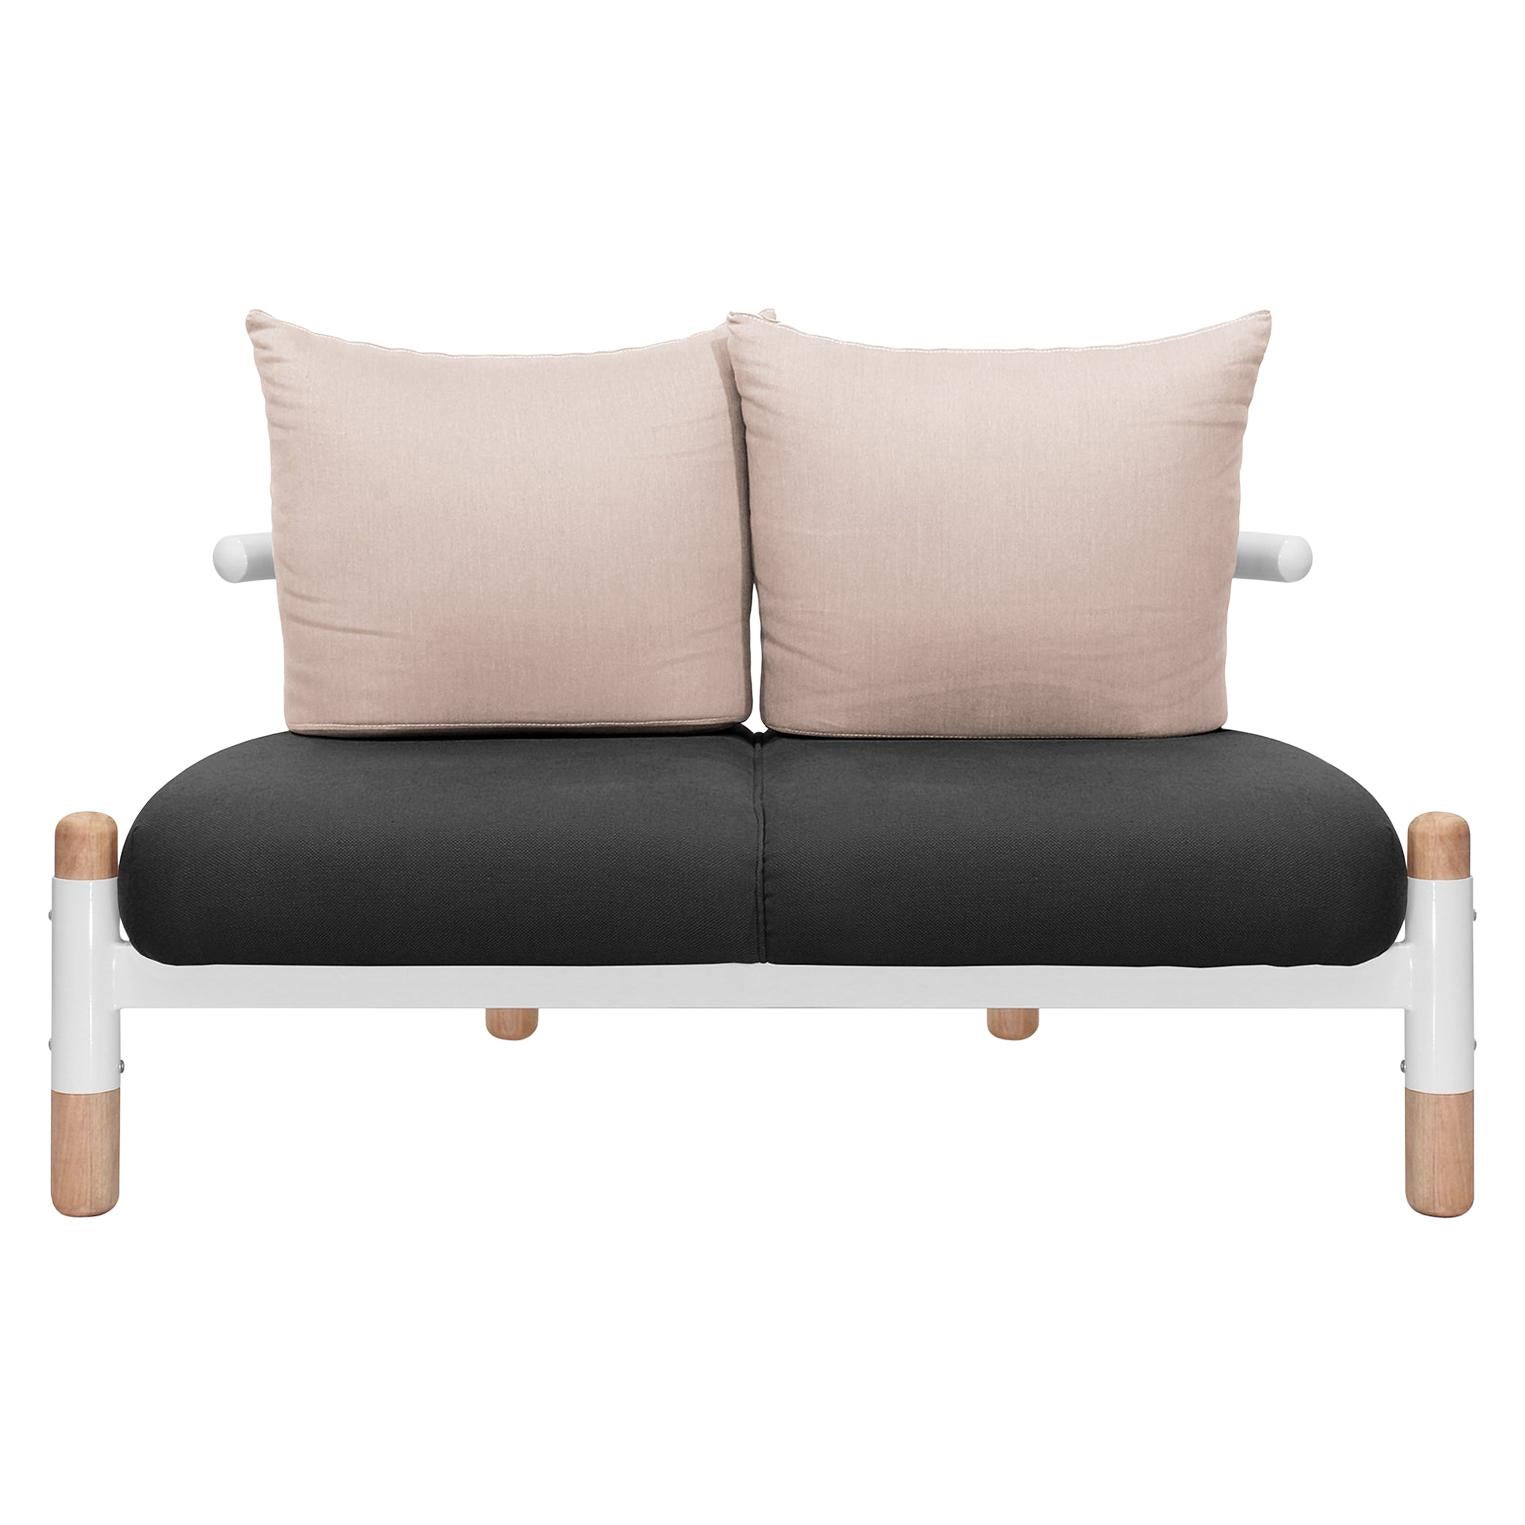 Black PK15 Two-Seat Sofa, Carbon Steel Structure and Wood Legs by Paulo Kobylka